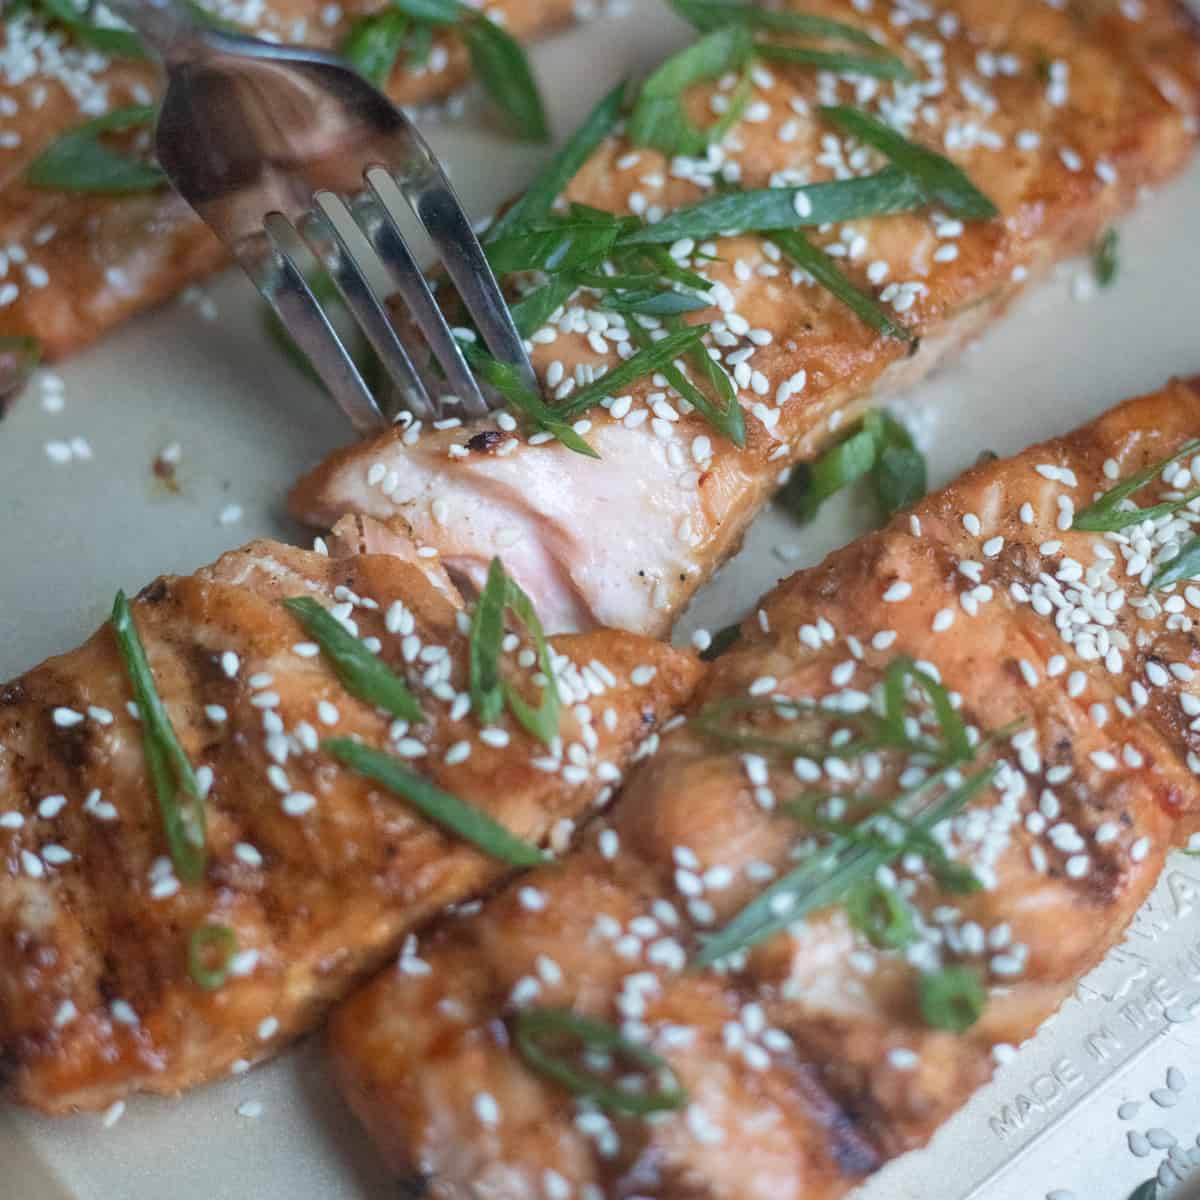 A salmon fillet on a baking sheet with a fork breaking into it. It is garnished with green onions and sesame seeds.